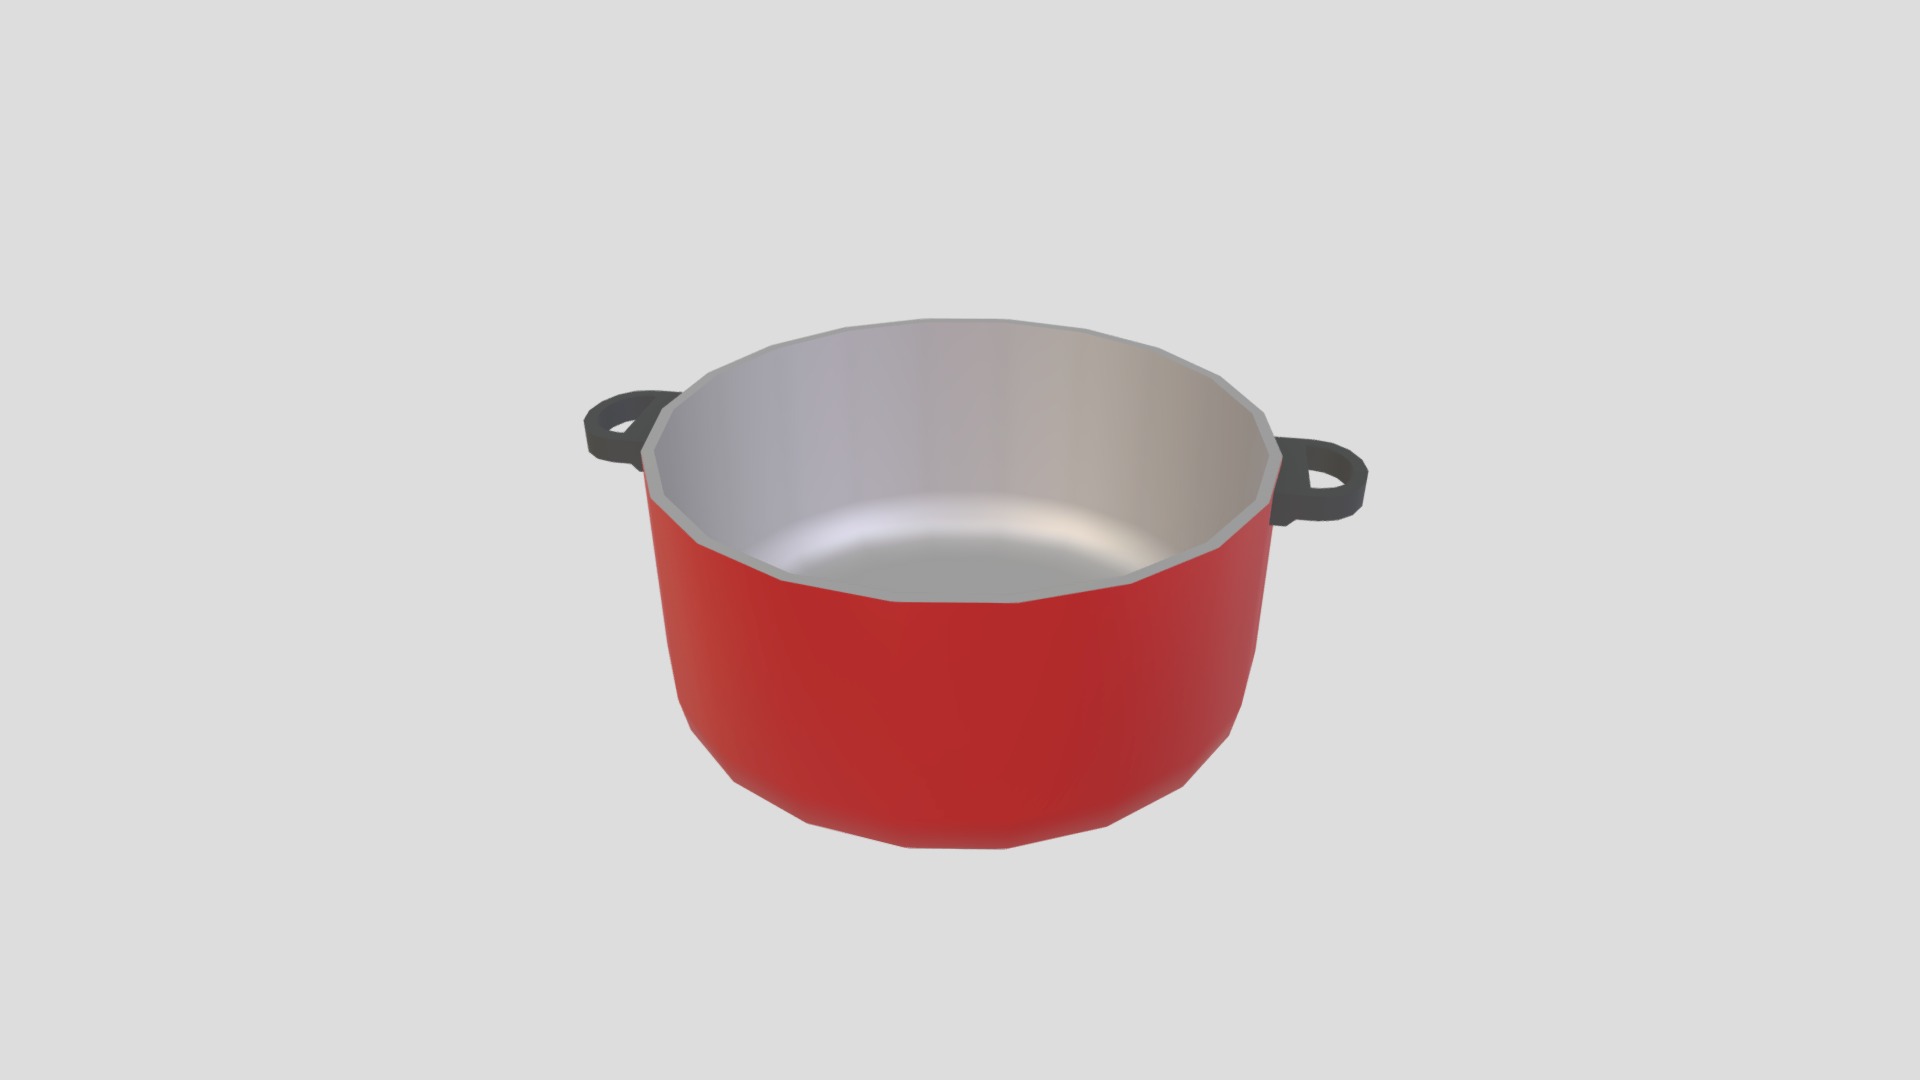 3D model Pot 1 - This is a 3D model of the Pot 1. The 3D model is about a red cup with a handle.